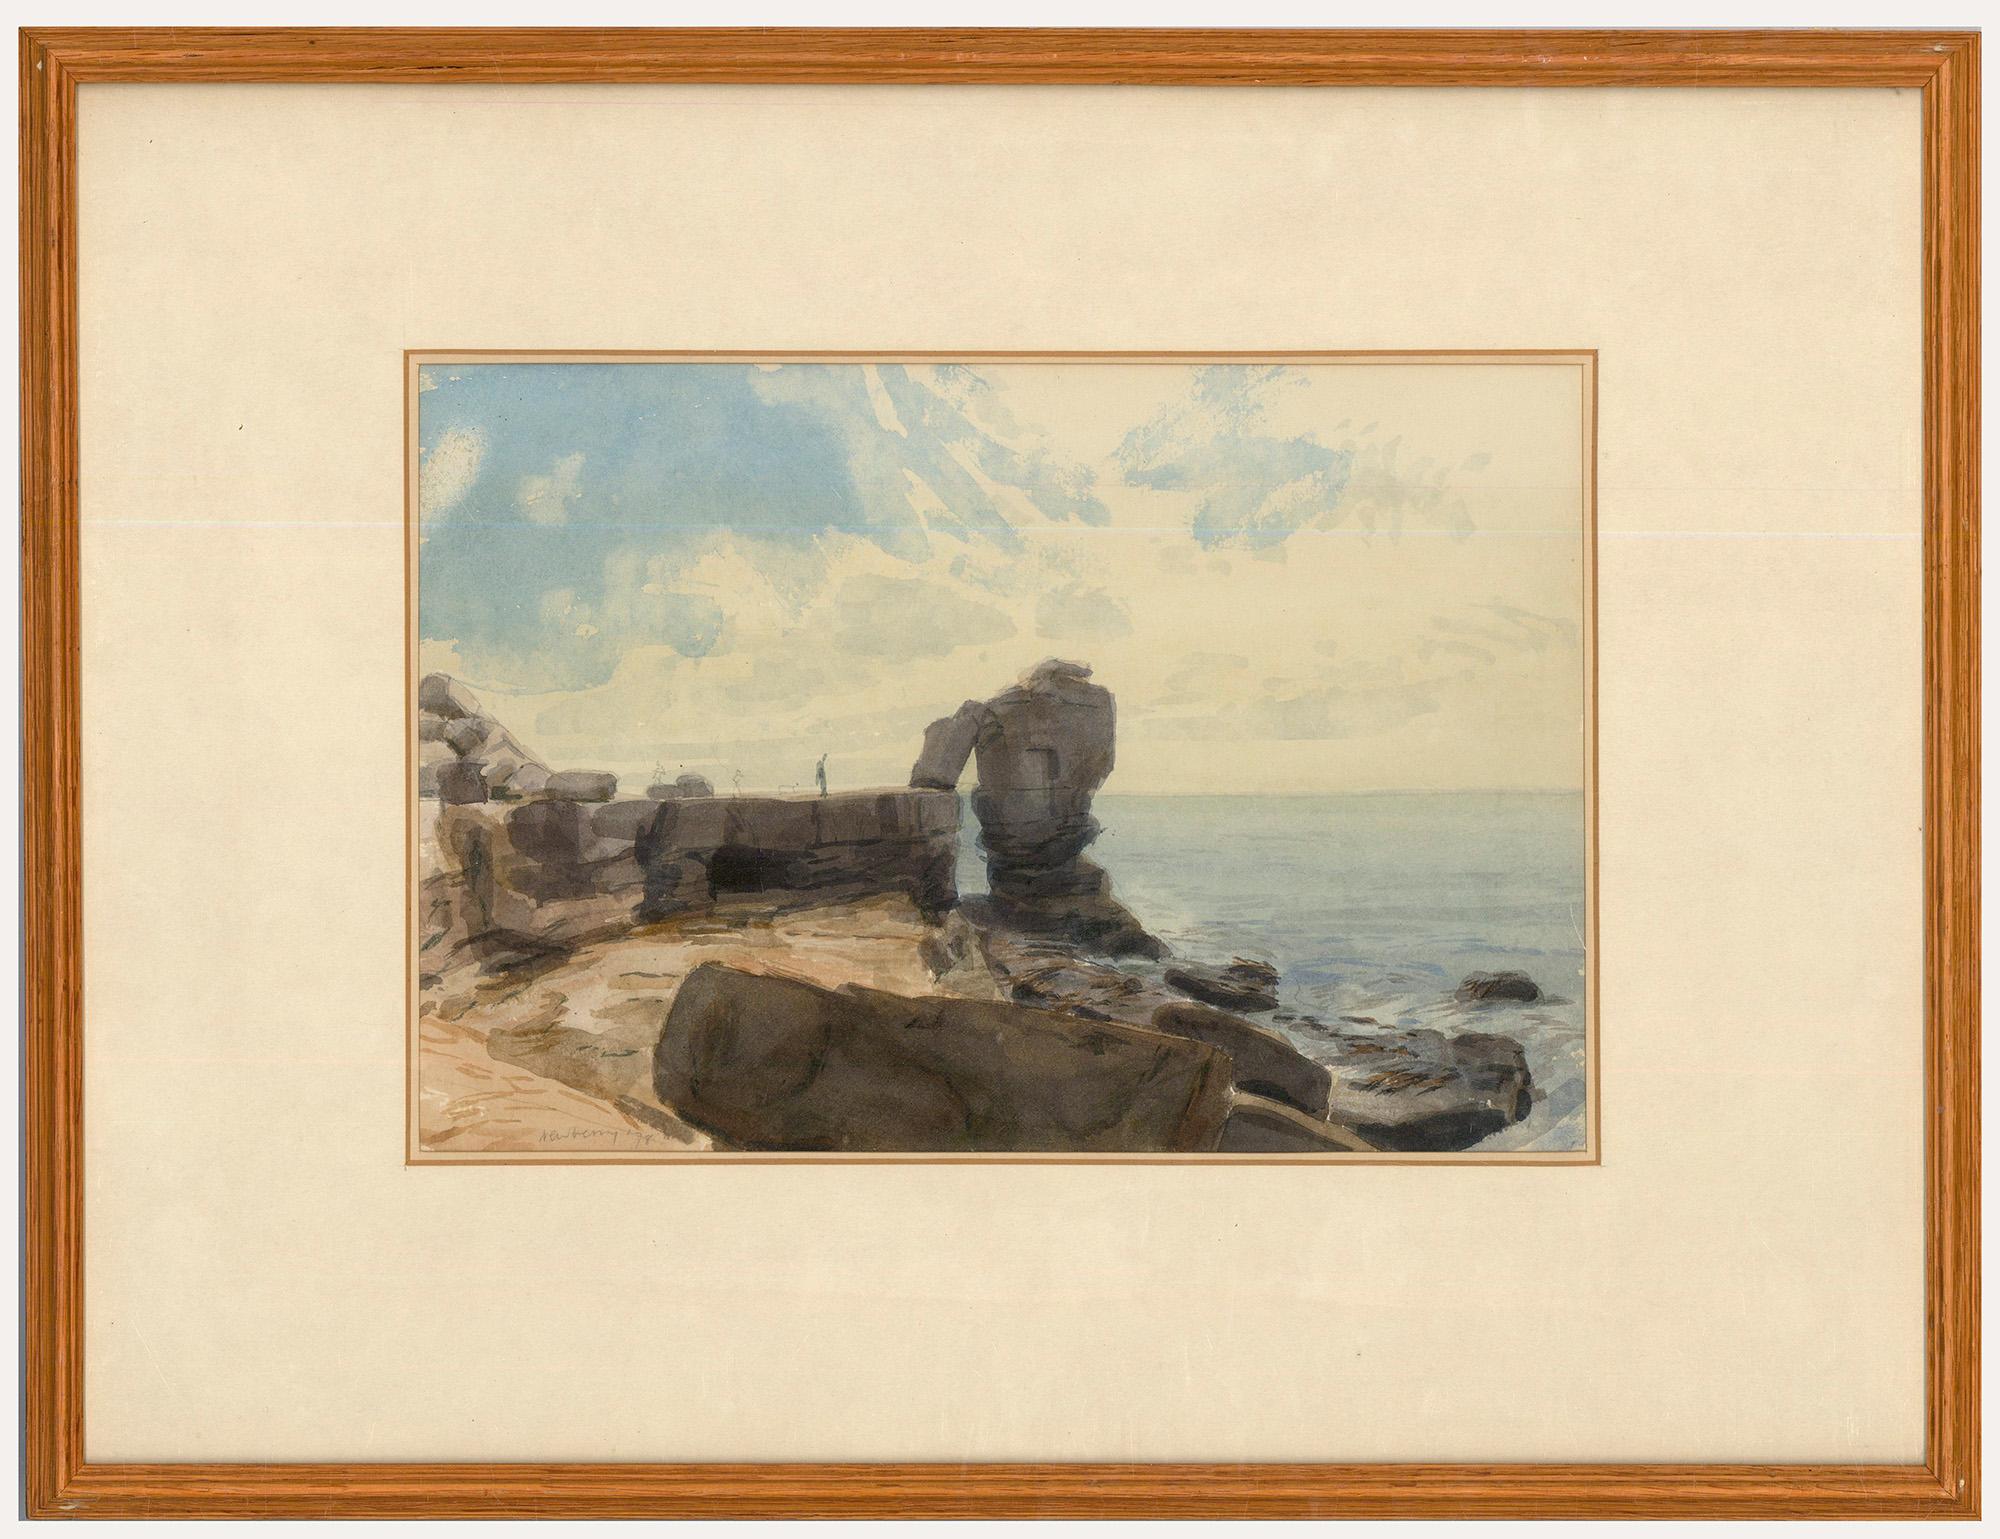 A fine watercolour depiction of Dorset's famous Pulpit rock, found on the southern tip of the Isle of Portland. The watercolour has been beautifully presented in a narrow oak frame with a crisp double mount. Signed in graphite to the lower left .